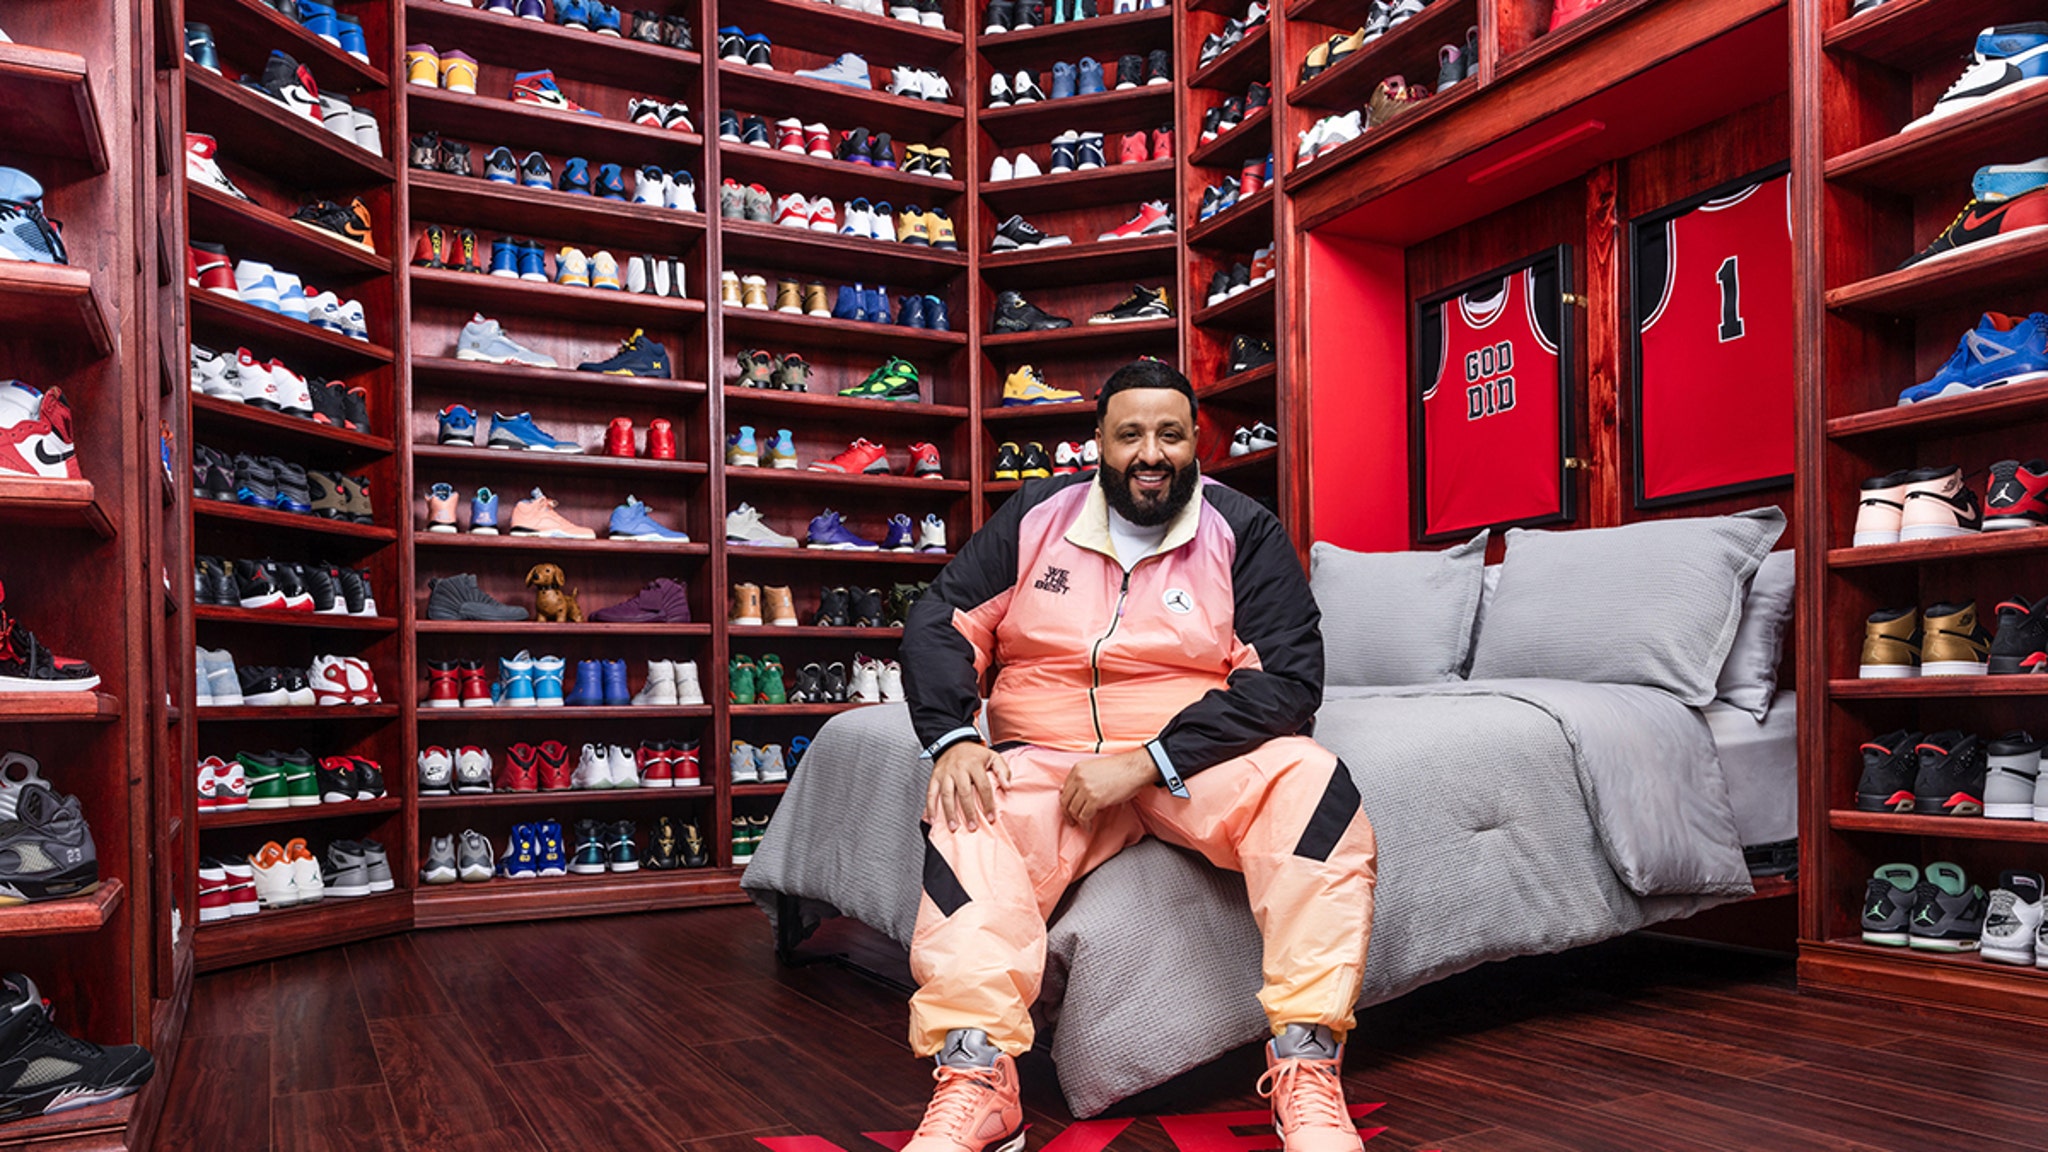 DJ Khaled Offering Airbnb Stay with Recreated Legendary Sneaker Closet